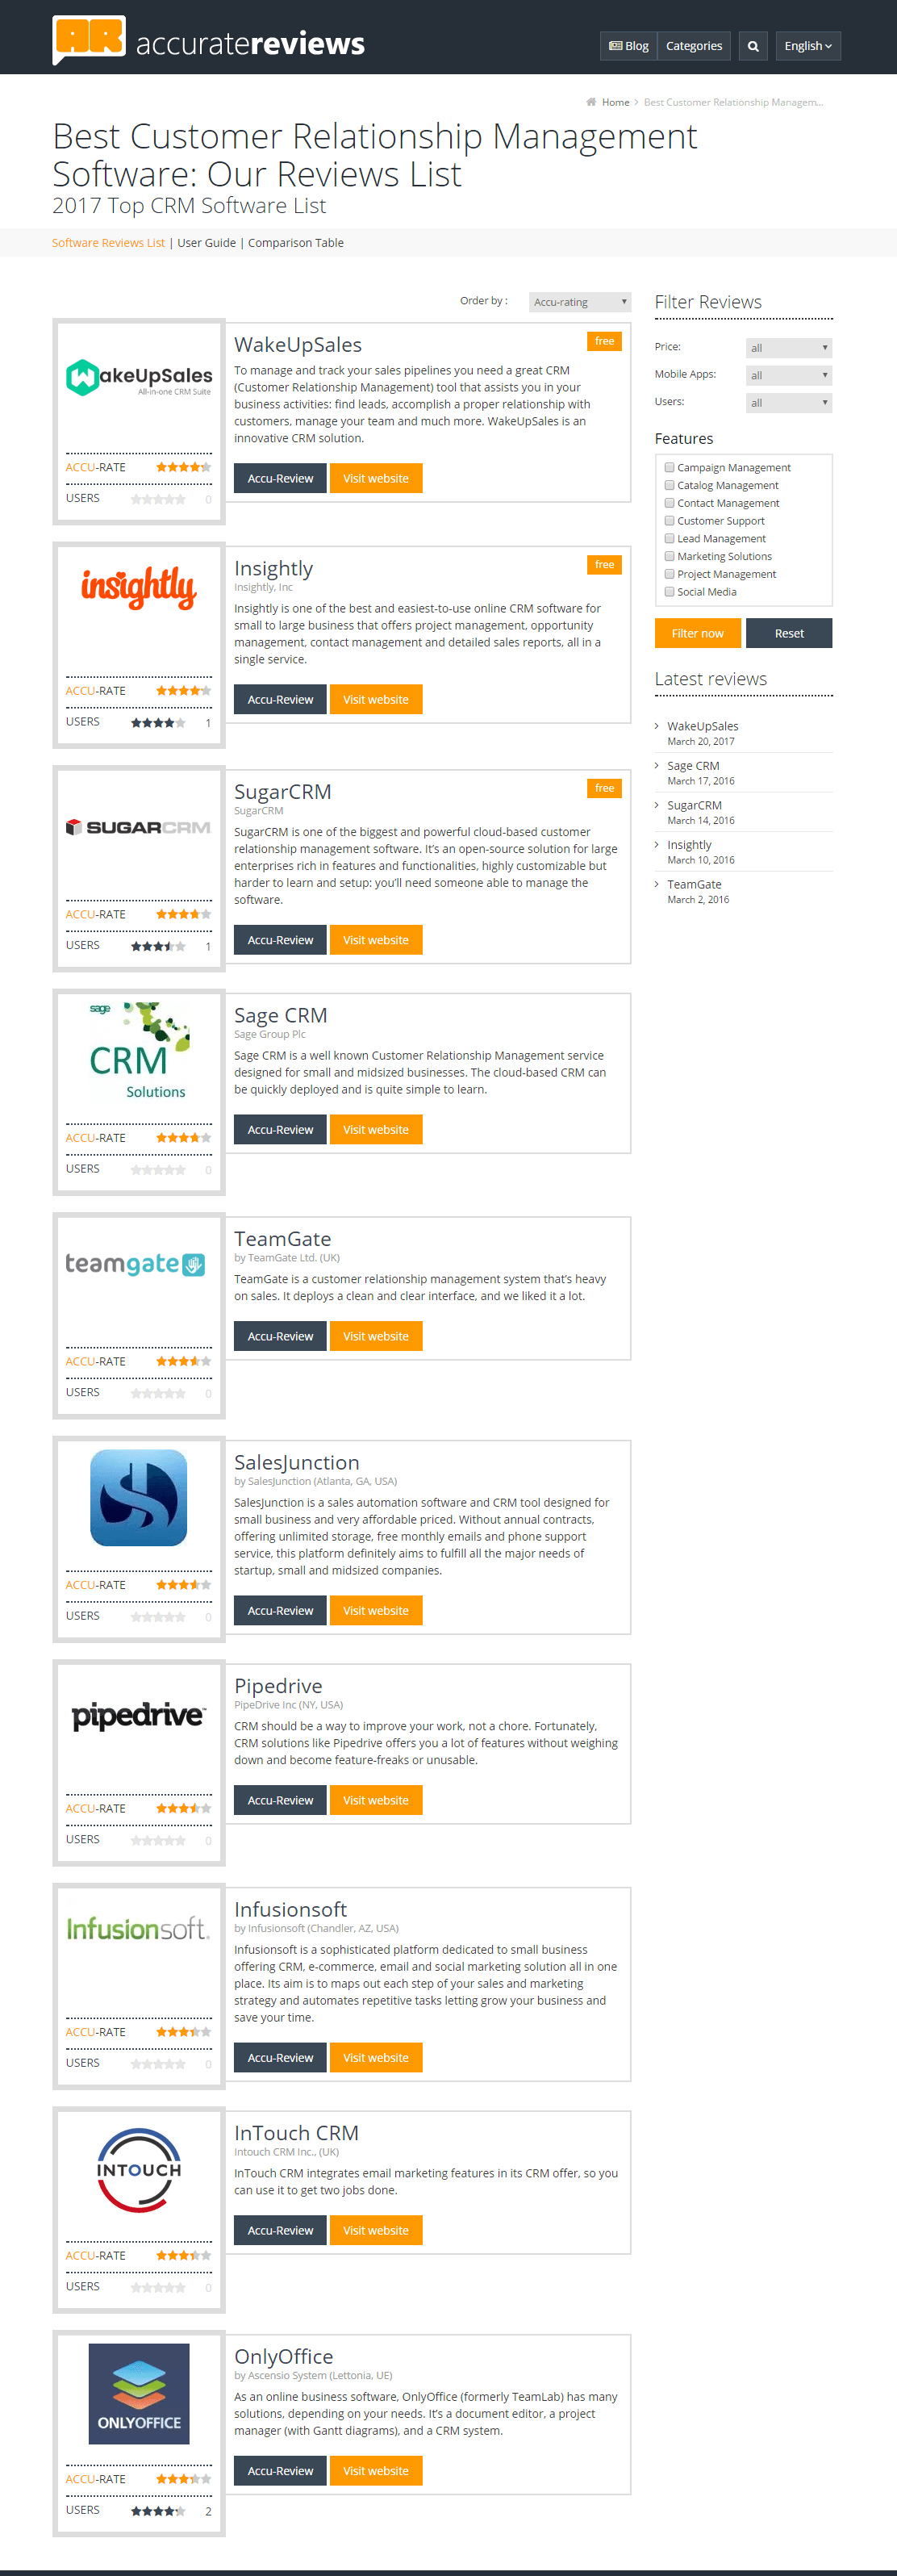 Accuratereview ScreenshotWakeupsales ranked #1 in Top CRMs List 2017